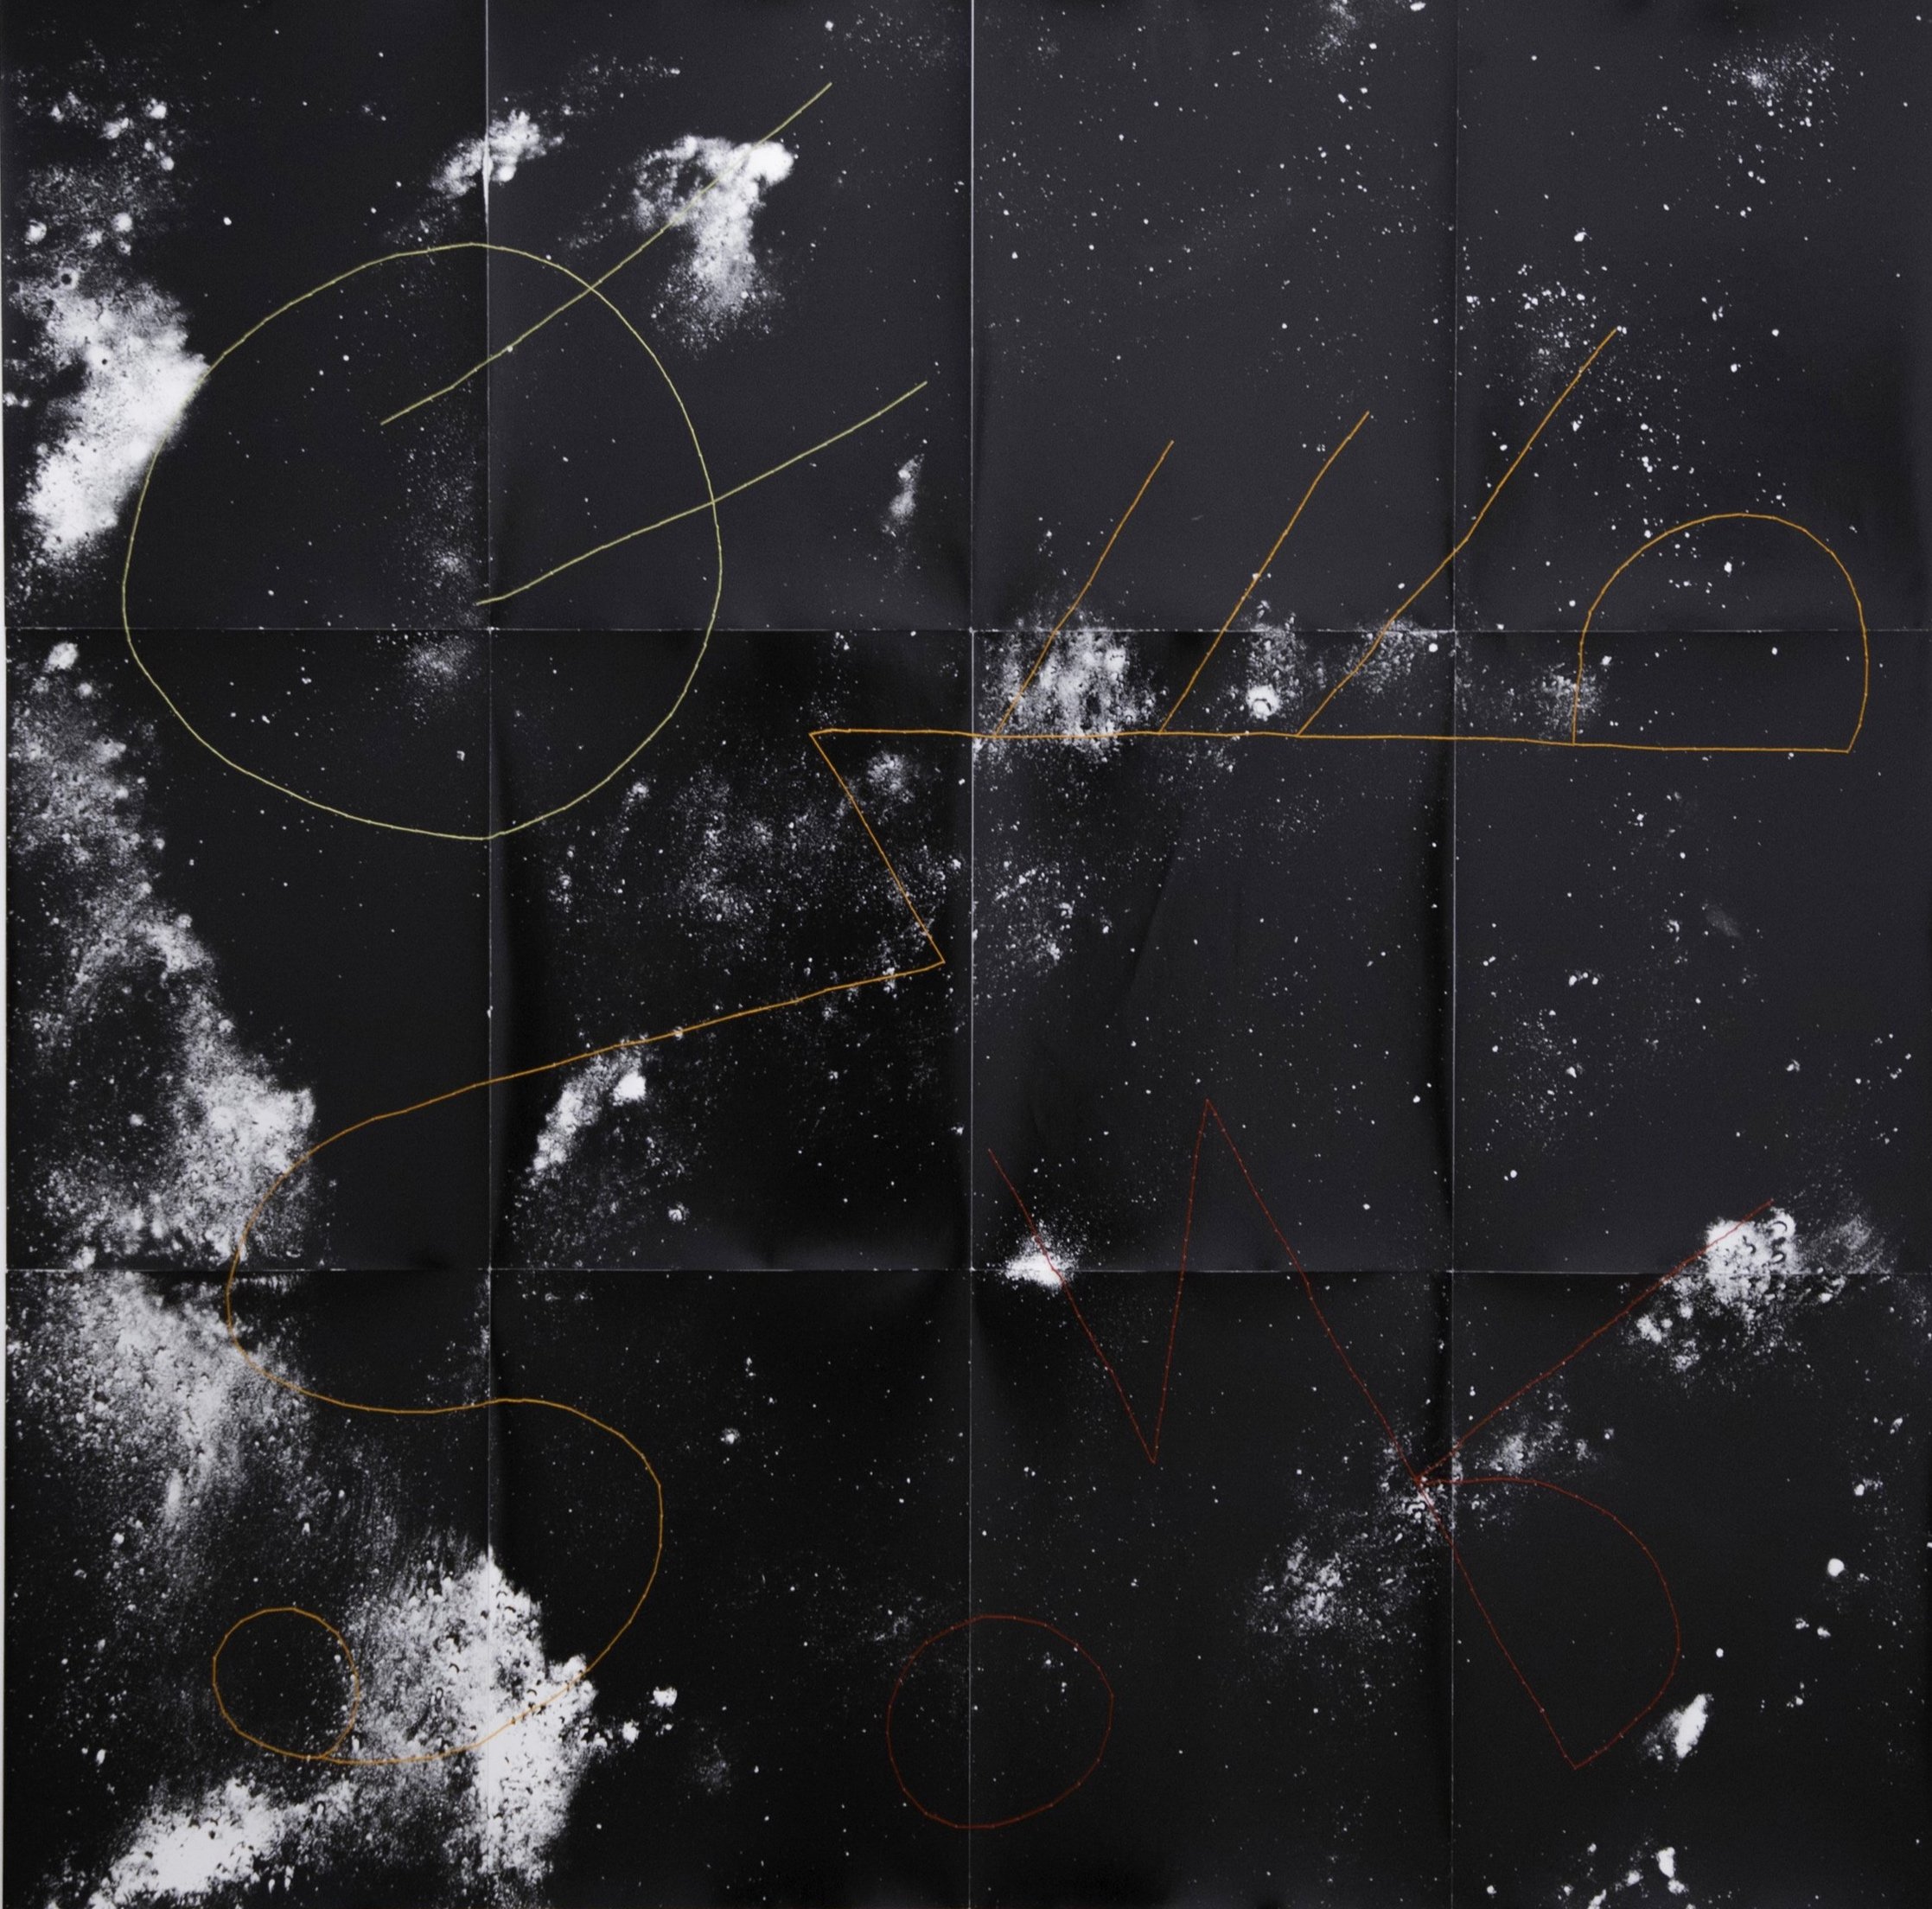  GIORGIA VALLI Map of Universe G.K.M Constellation, 2018 Red, Orange, Yellow Stars from the System of Stellar Classification O.B.A.F.G.K.M. (Oh Be A Fine Guy, Kiss Me) Unique Photograms. Gelatin Silver Prints. Hand-sewn. Mosaic (12 prints) 48 x 48 in